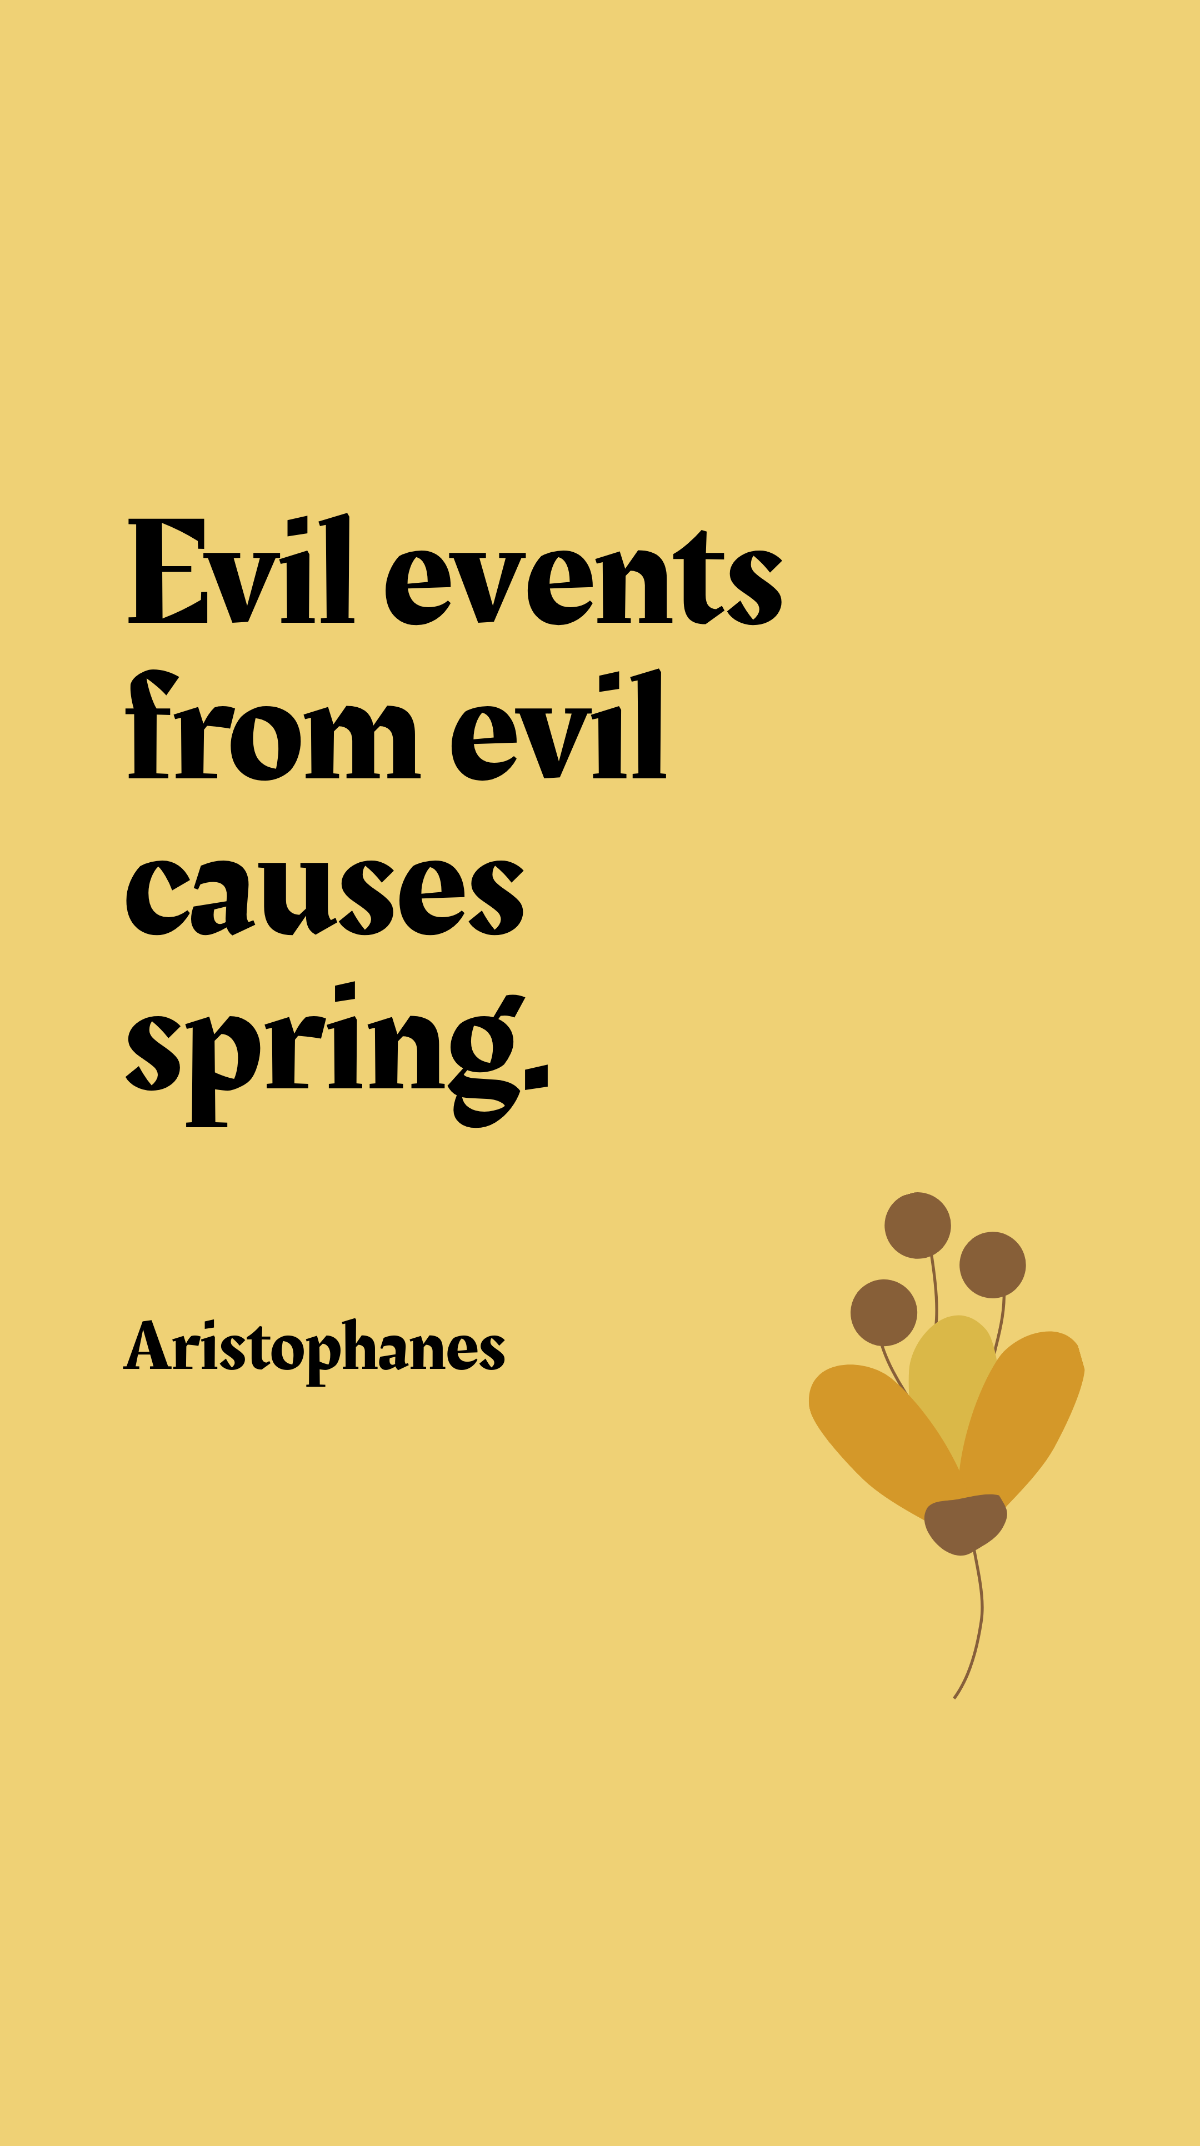 Free Aristophanes - Evil events from evil causes spring. Template